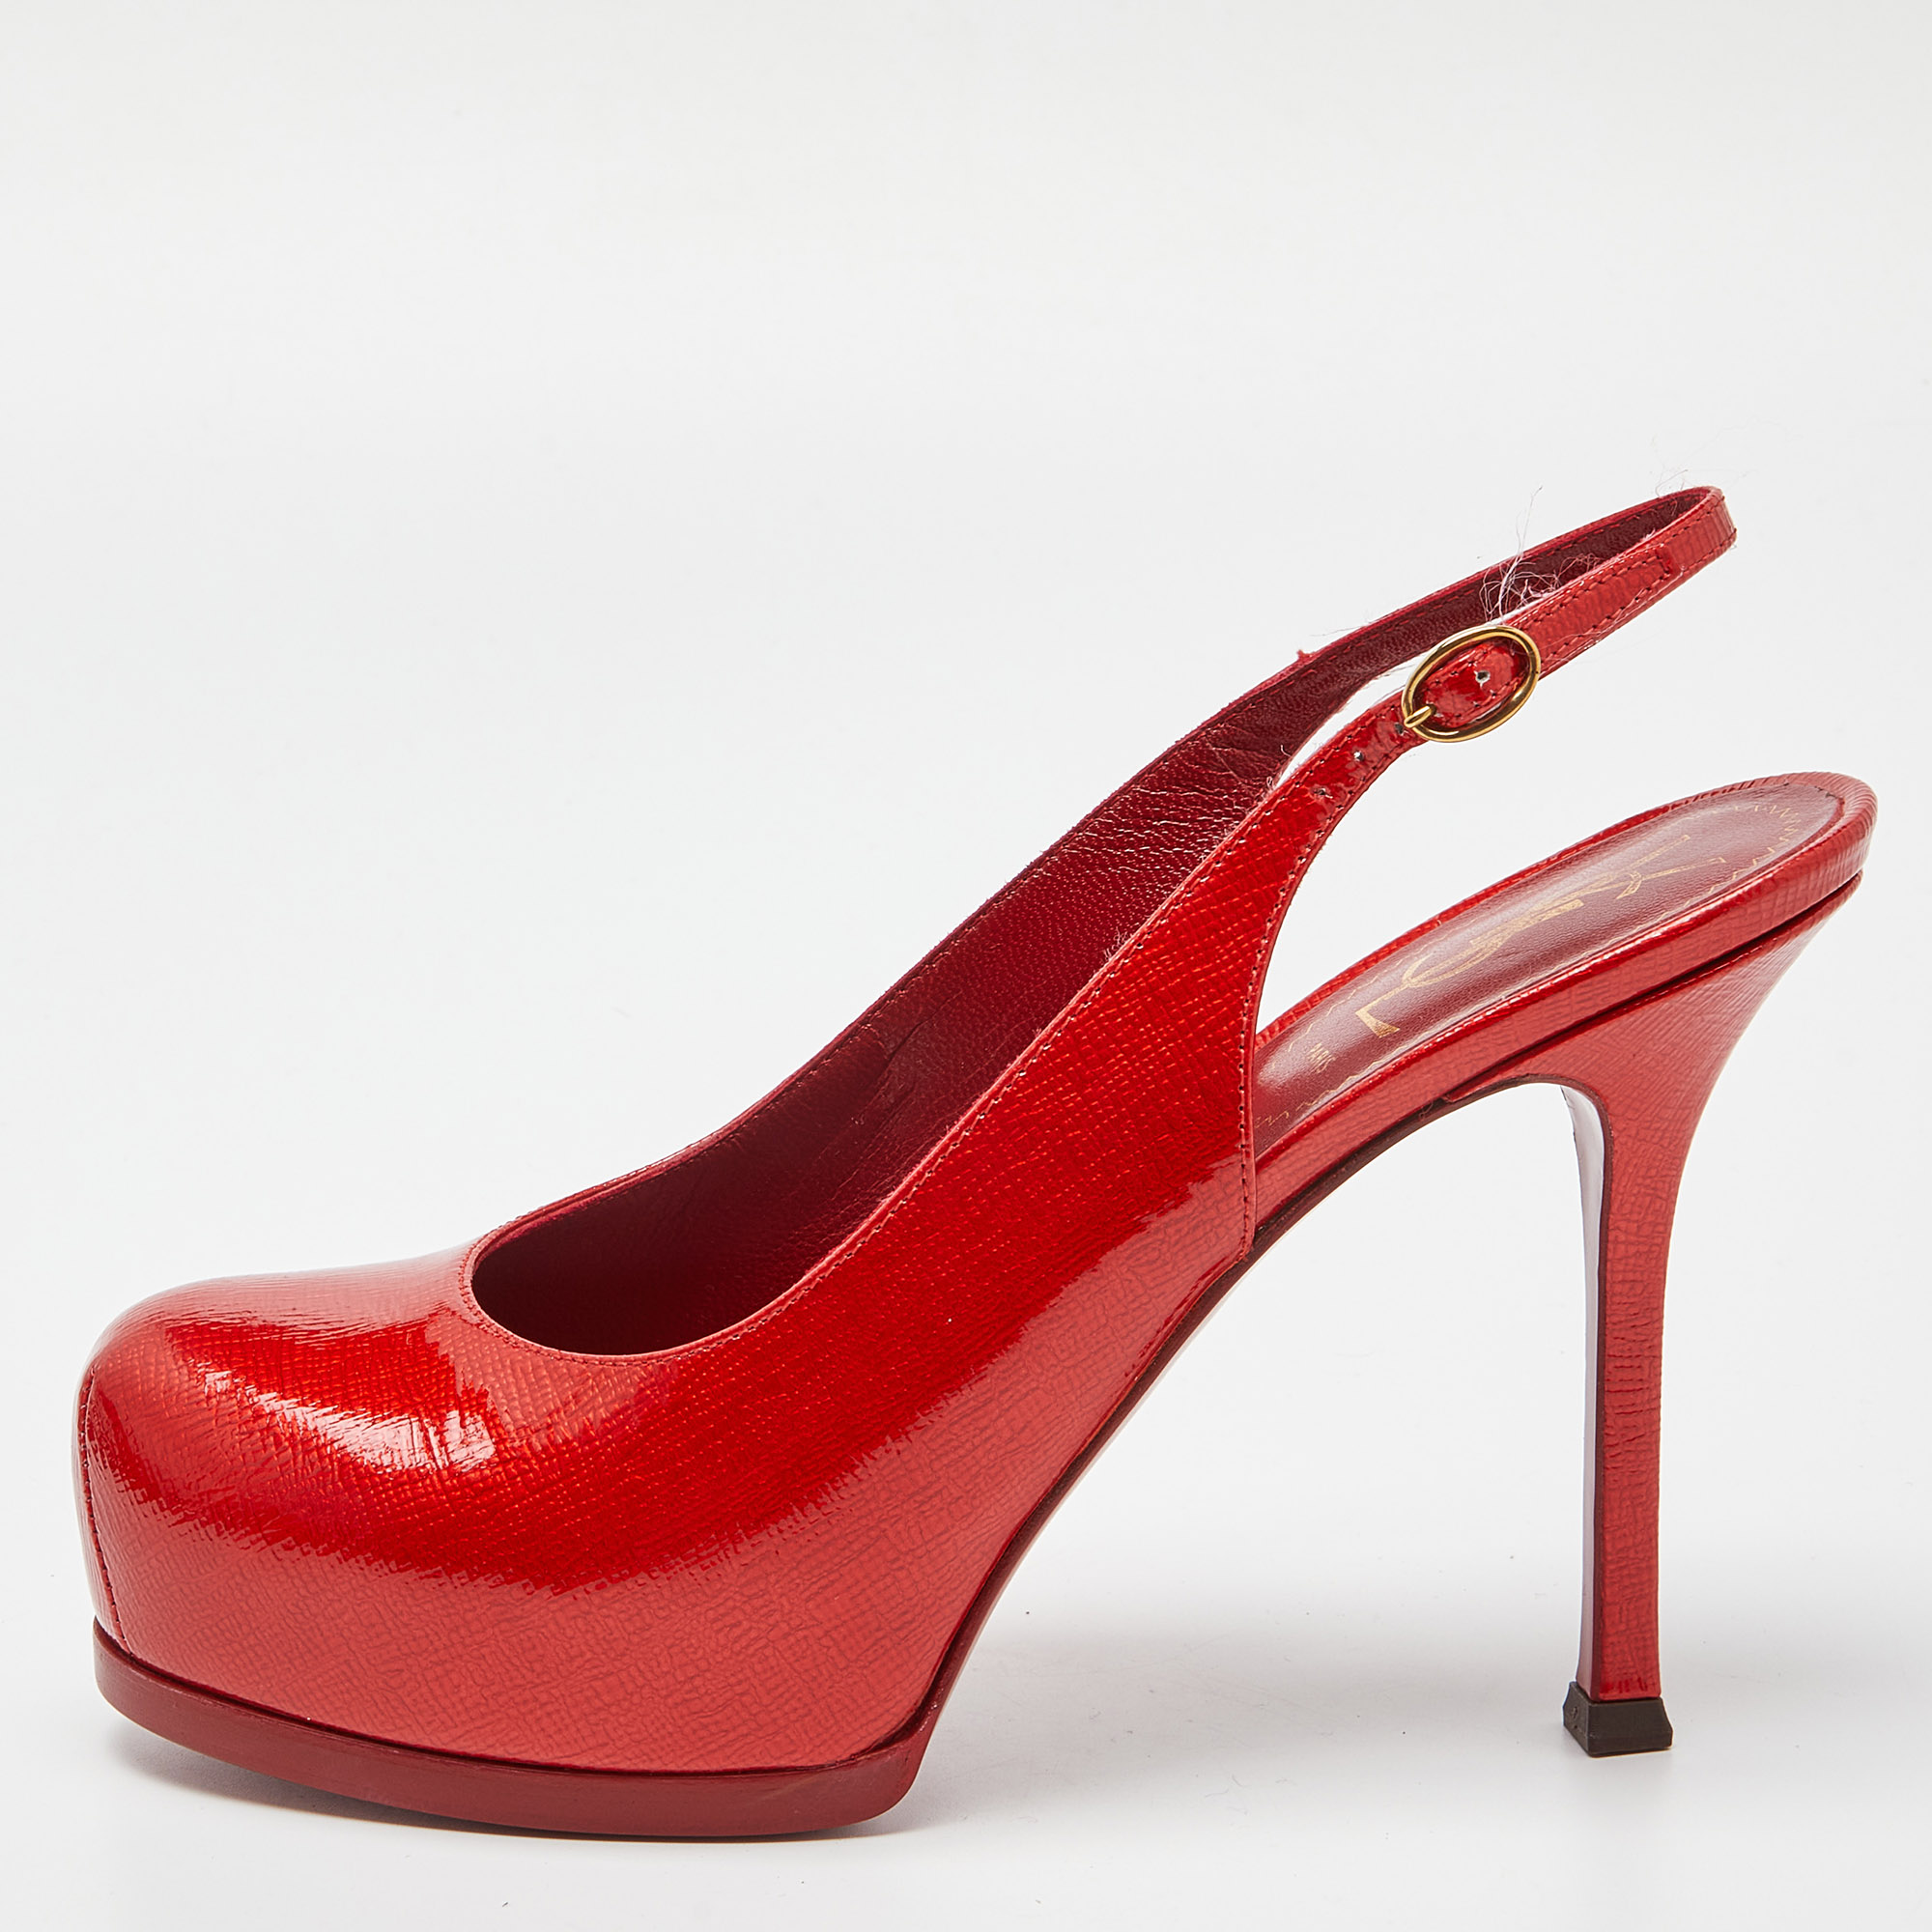 Yves saint laurent red patent leather tribtoo slingback pumps size 36.5